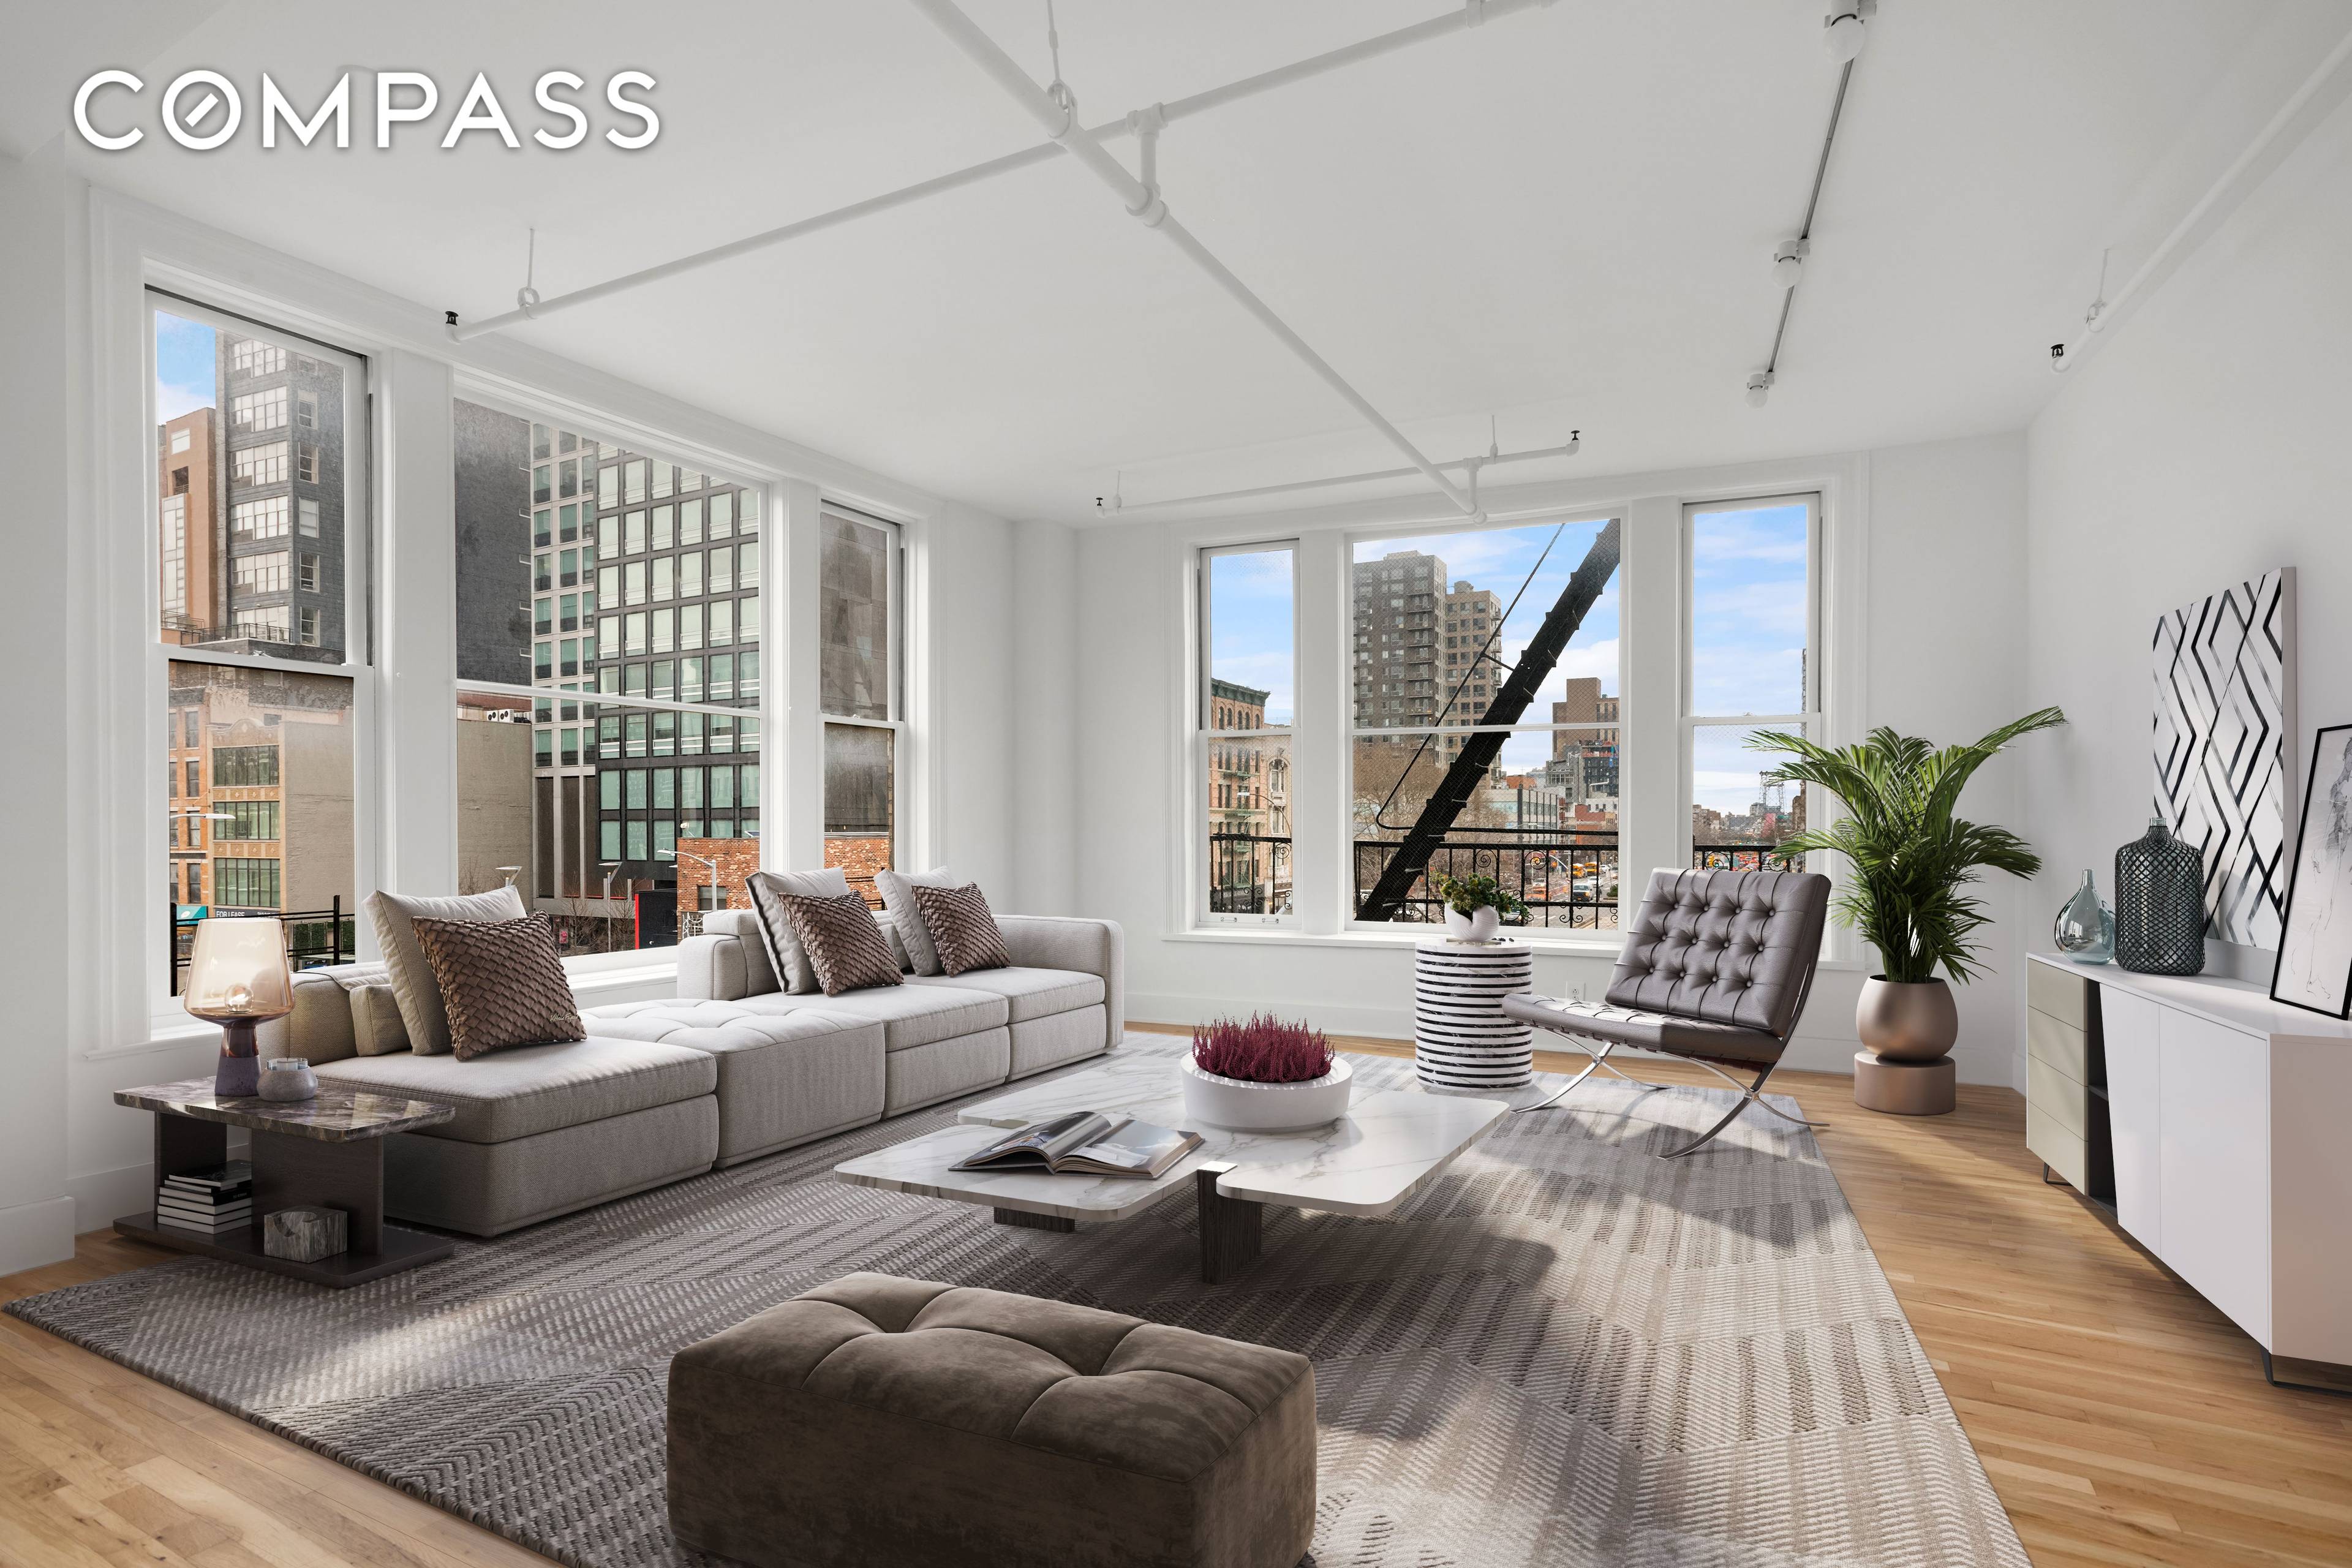 Spectacular large open loft in Nolita with 2 Bedrooms and 1 full bath, This is one of three, rarely available, authentic, full floor lofts in this rental building.